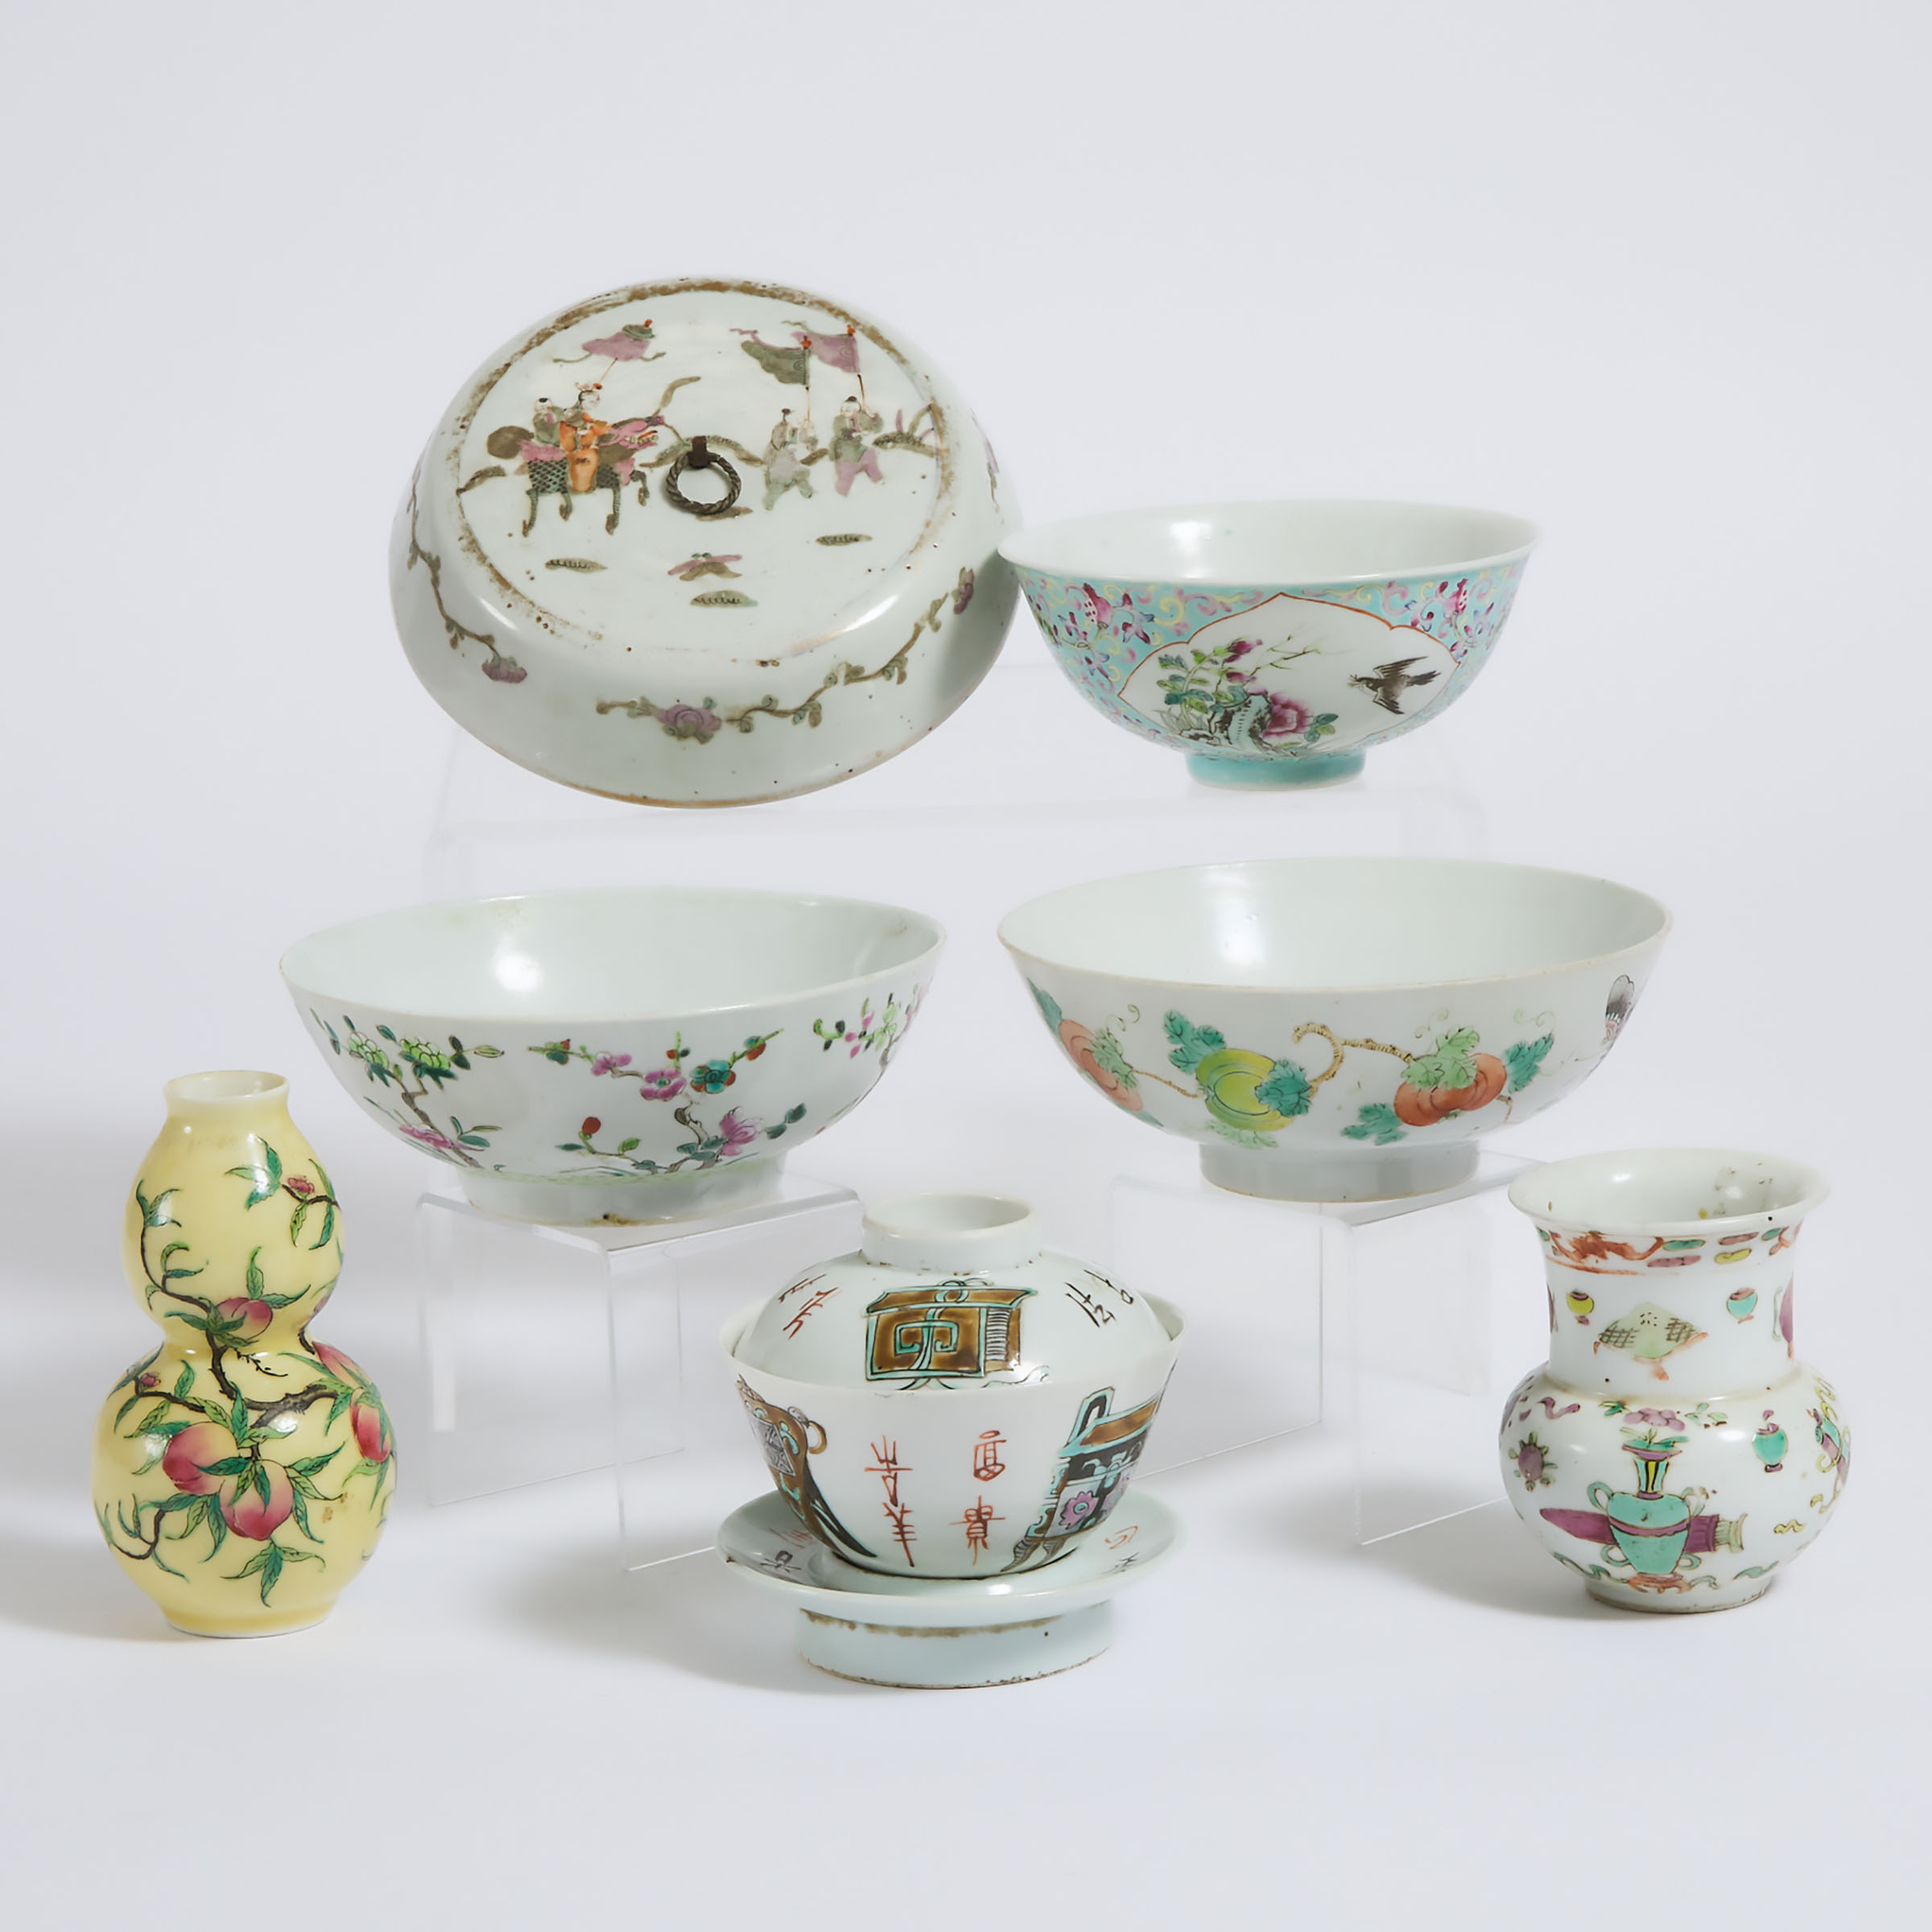 A Group of Seven Chinese Enameled Porcelain Wares, 19th Century and Later